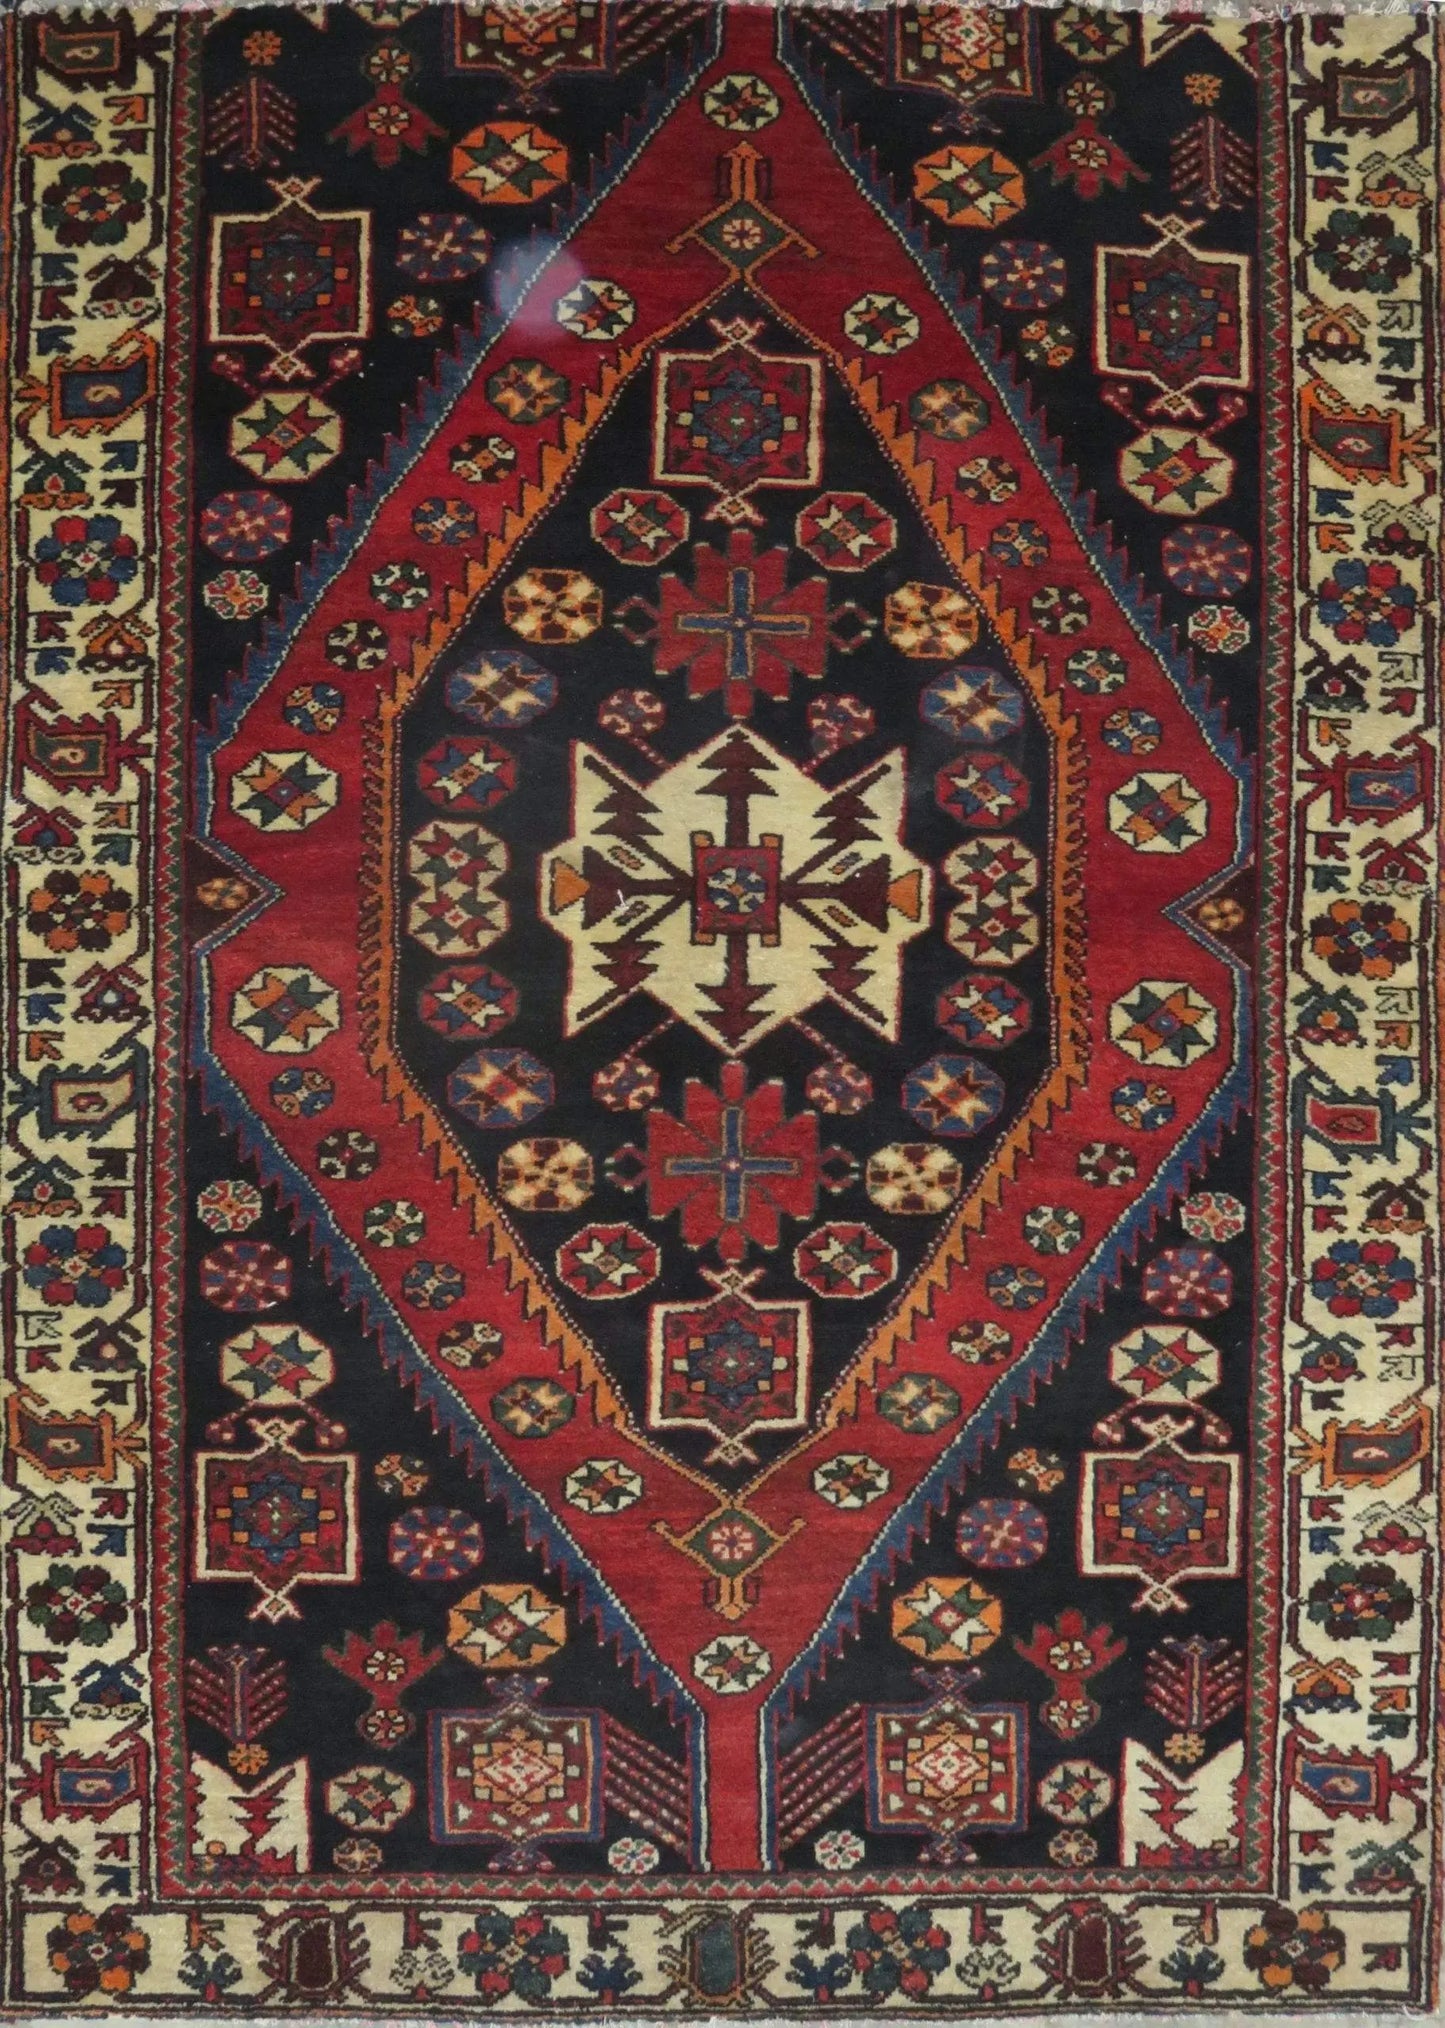 Hand-Knotted Persian Wool Rug _ Luxurious Vintage Design, 5'4" x 3'9", Artisan Crafted